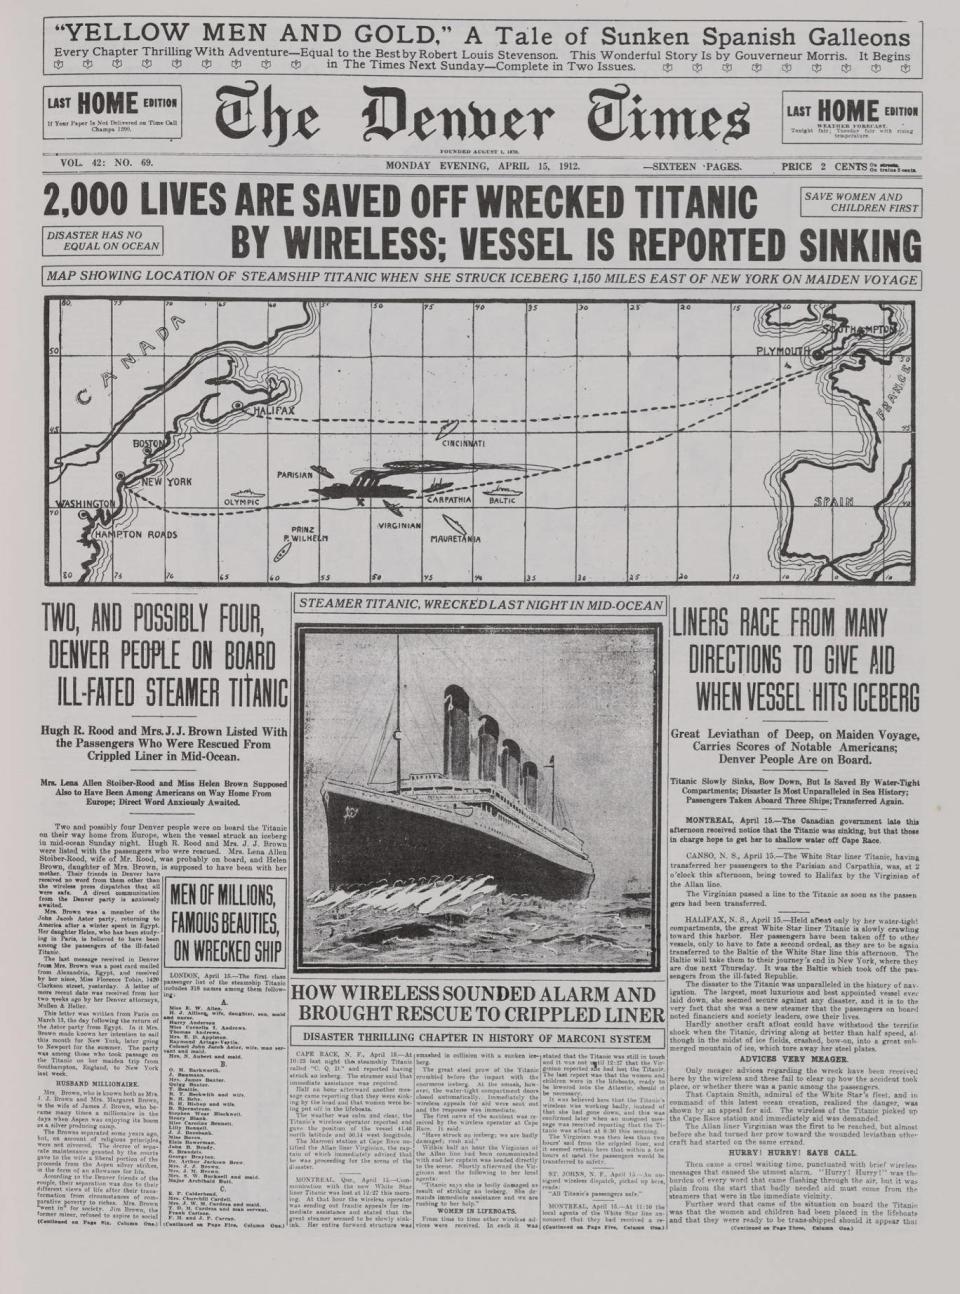 Newspapers in the US were unduly upbeat about the Titanic disaster (National Science and Media Museum)